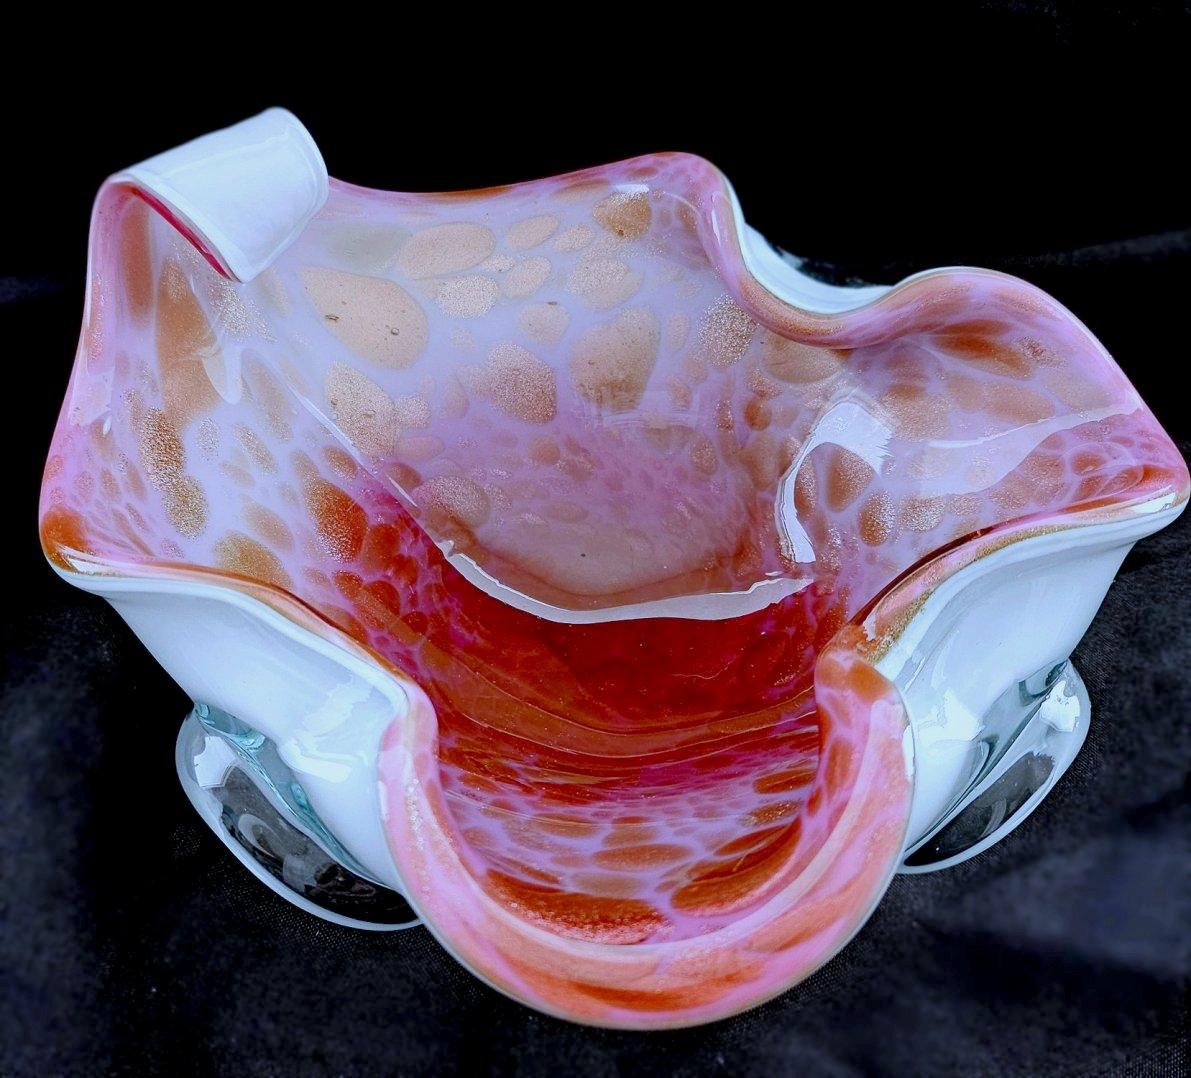 Substantial Vintage Murano Glass Bowl with Aventurine, Fratelli Toso suspected.
This is a beautiful, substantial piece of glass that would make a great centerpiece or other focal point. It is sure to make an impression.  

It is about 8.5 inches